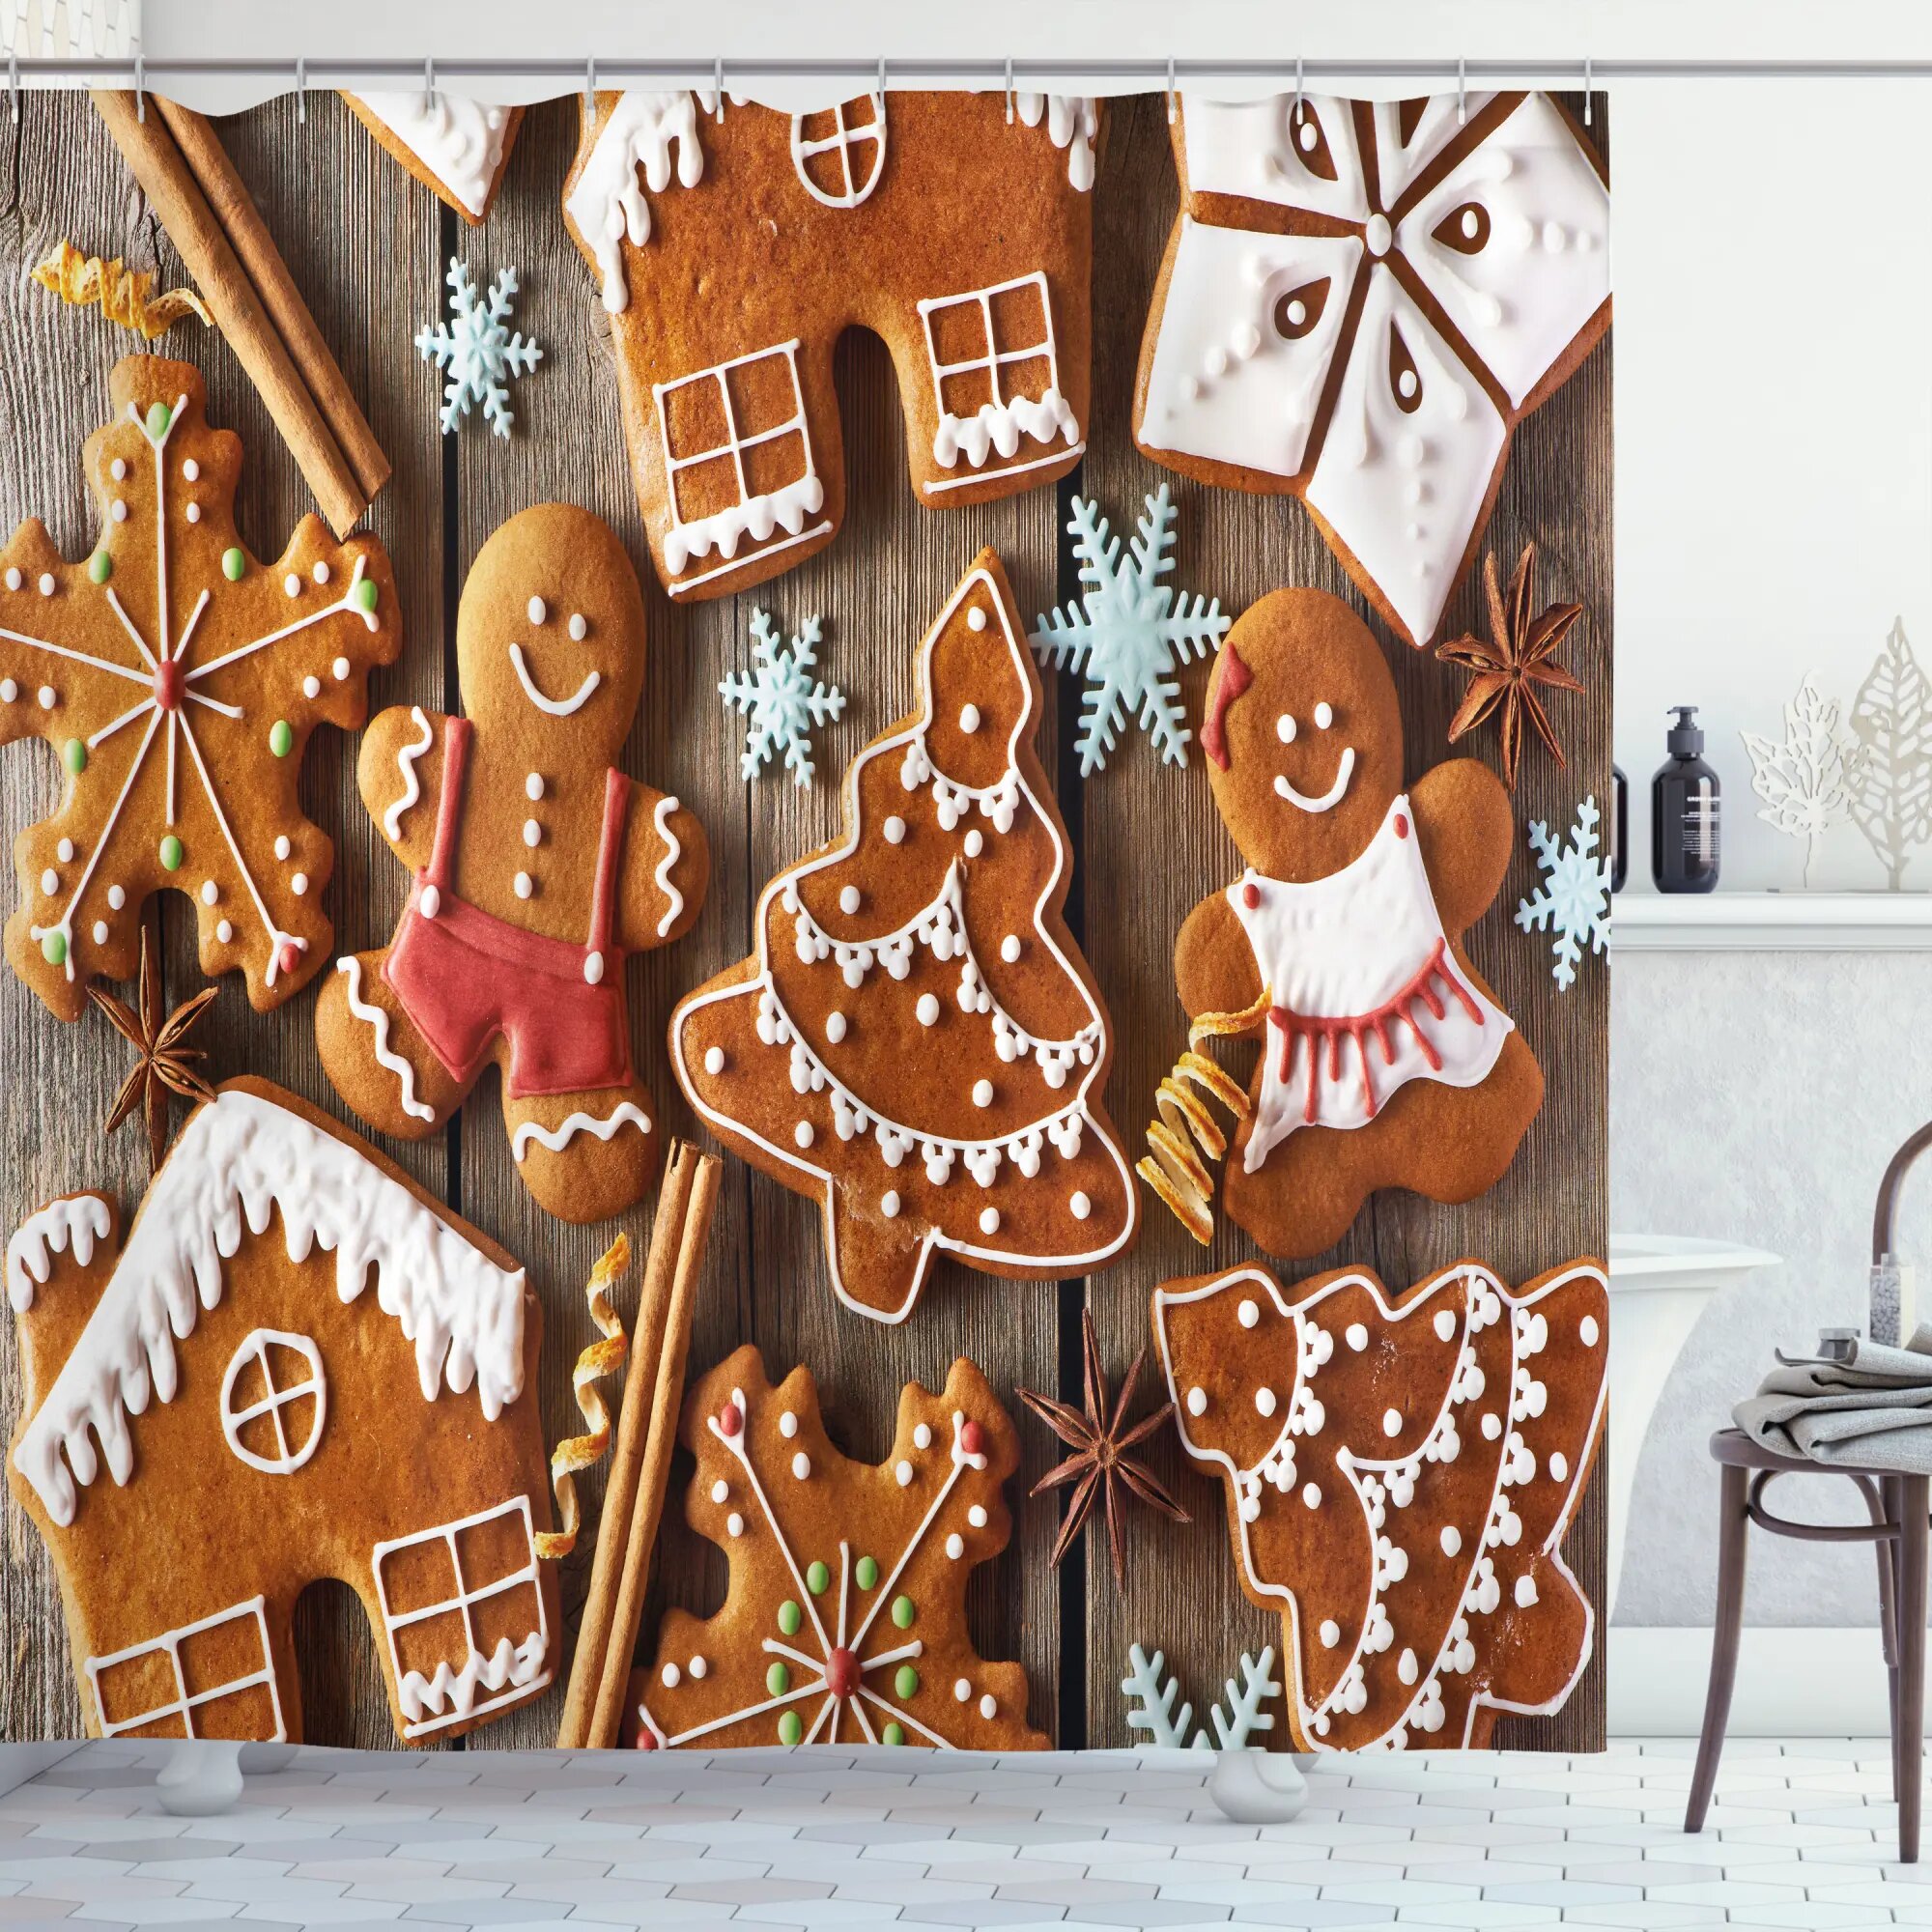 Gingerbread cookies and Christmas tree decor Shower Curtain Fabric & 12hooks 